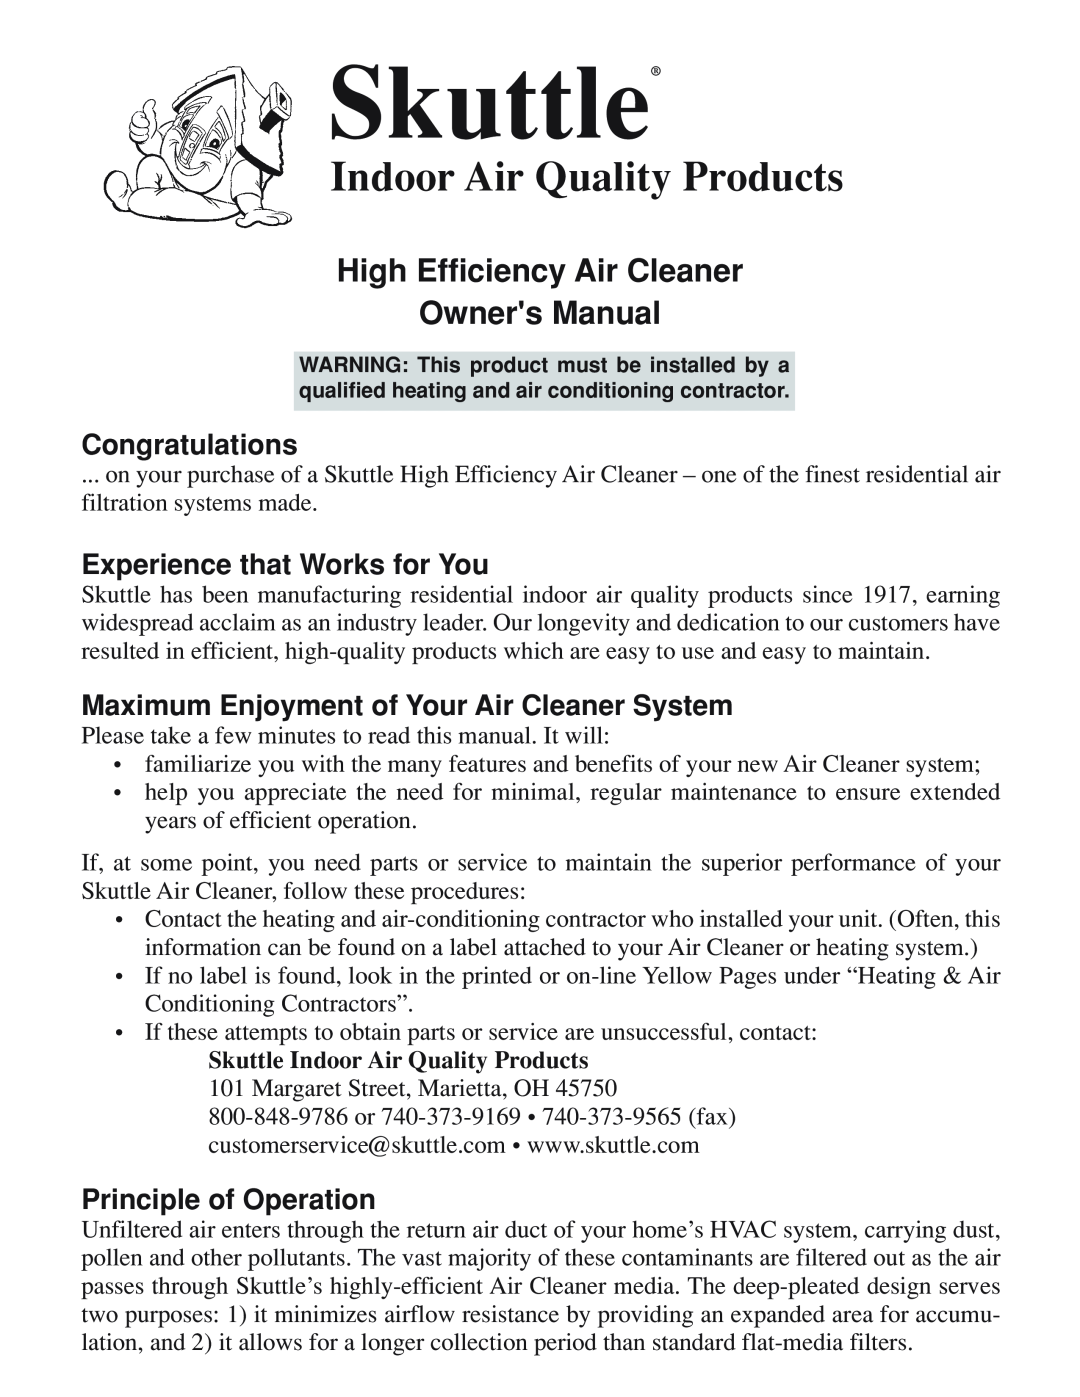 Skuttle Indoor Air Quality Products Air Cleaner owner manual Congratulations, Experience that Works for You, Skuttle 